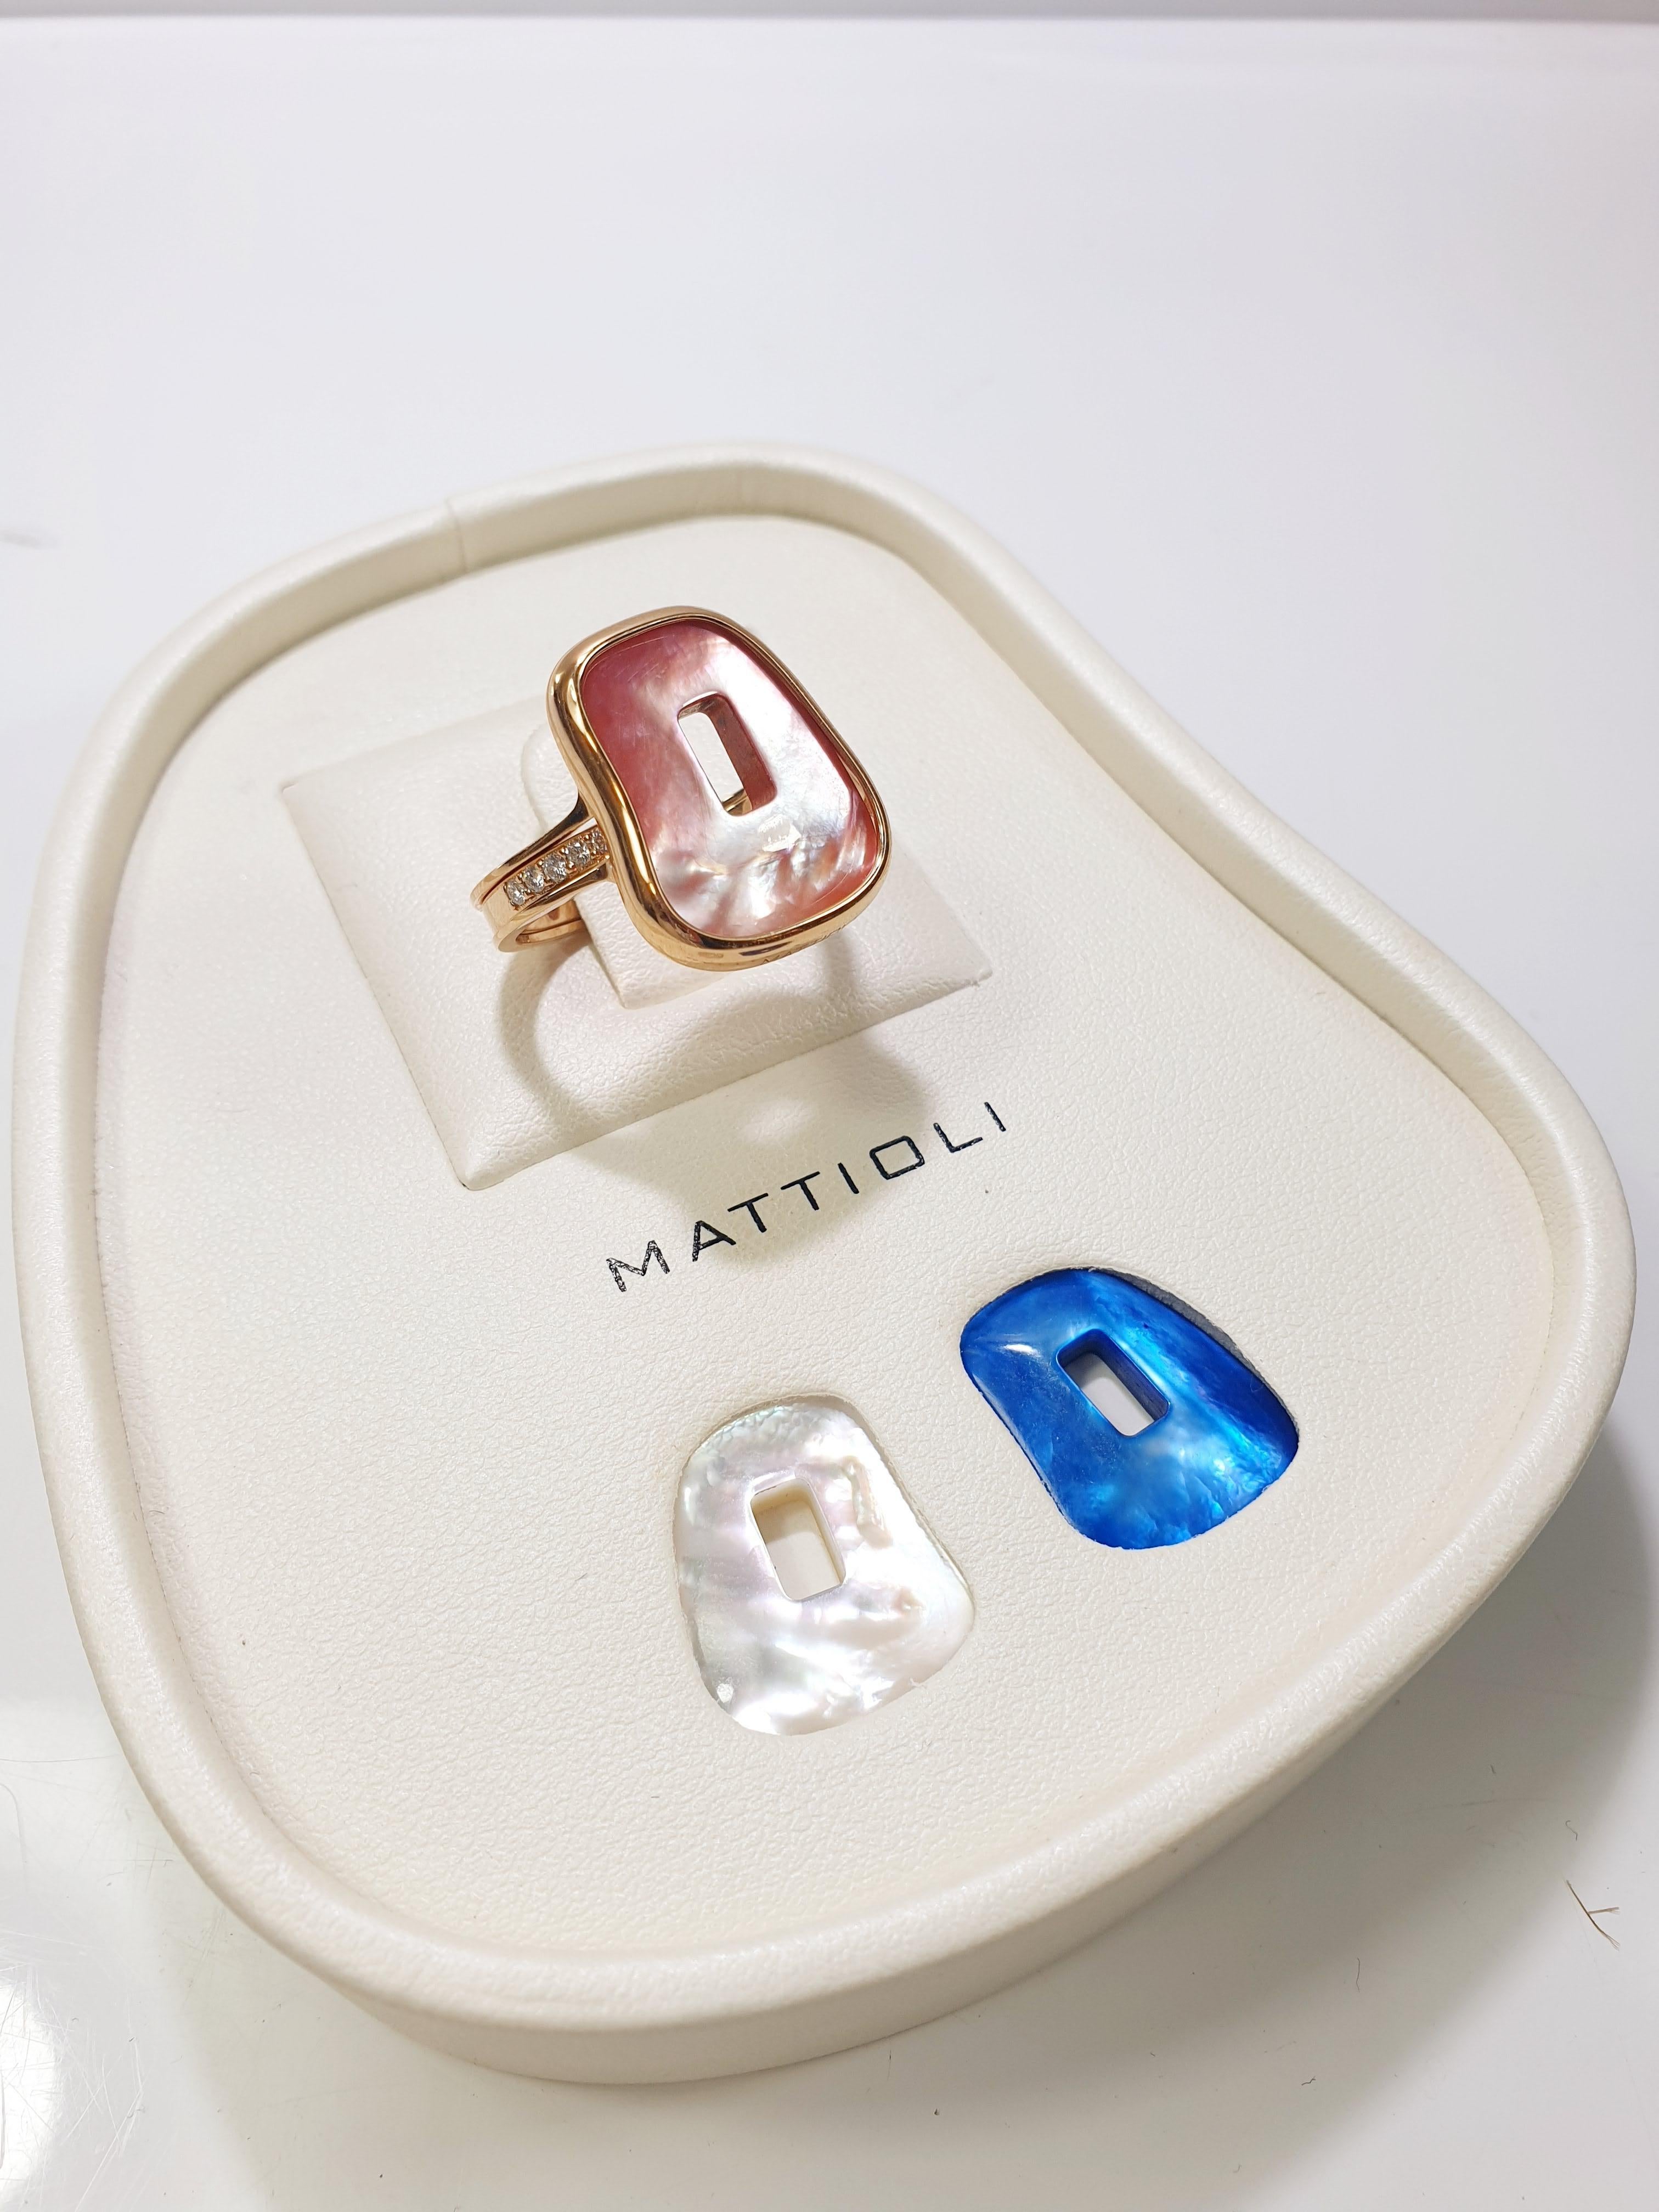 For Sale:  Mattioli Puzzle Collection 18 Karat Rose Gold Ring with Diamonds and 3 Puzzles 2